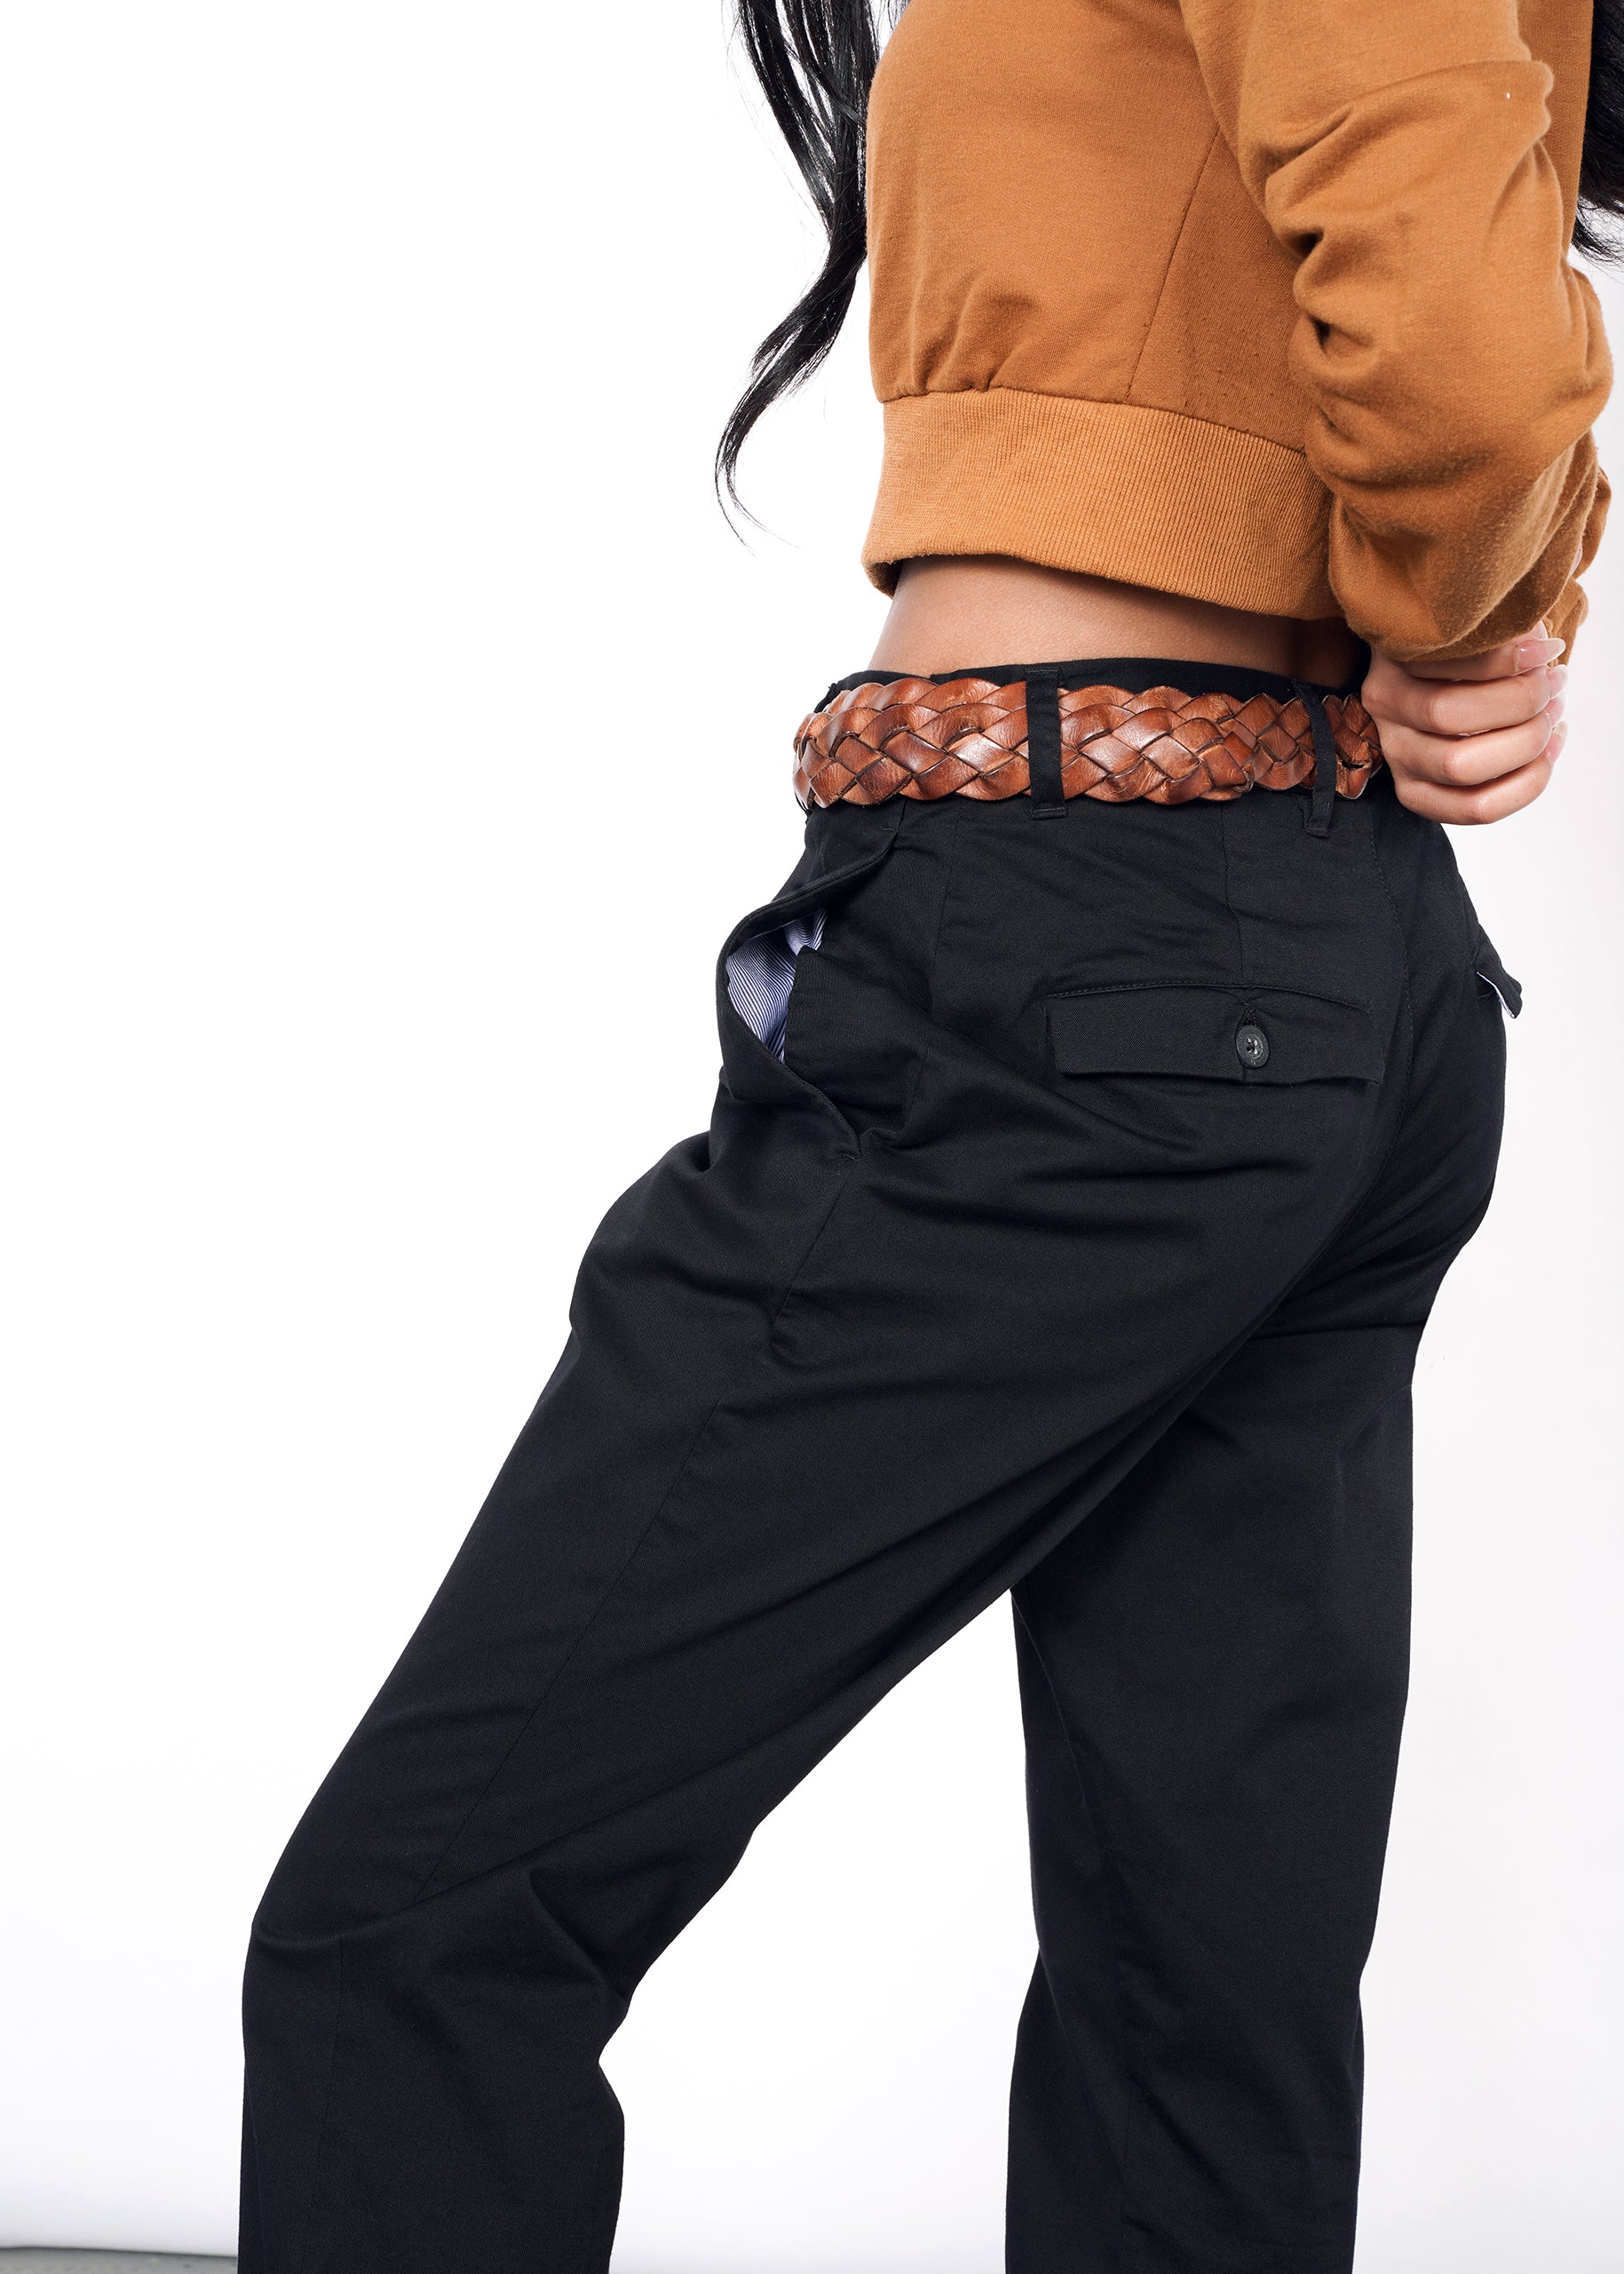 Women's Dress Pants | 100% Made to measure - Sumissura